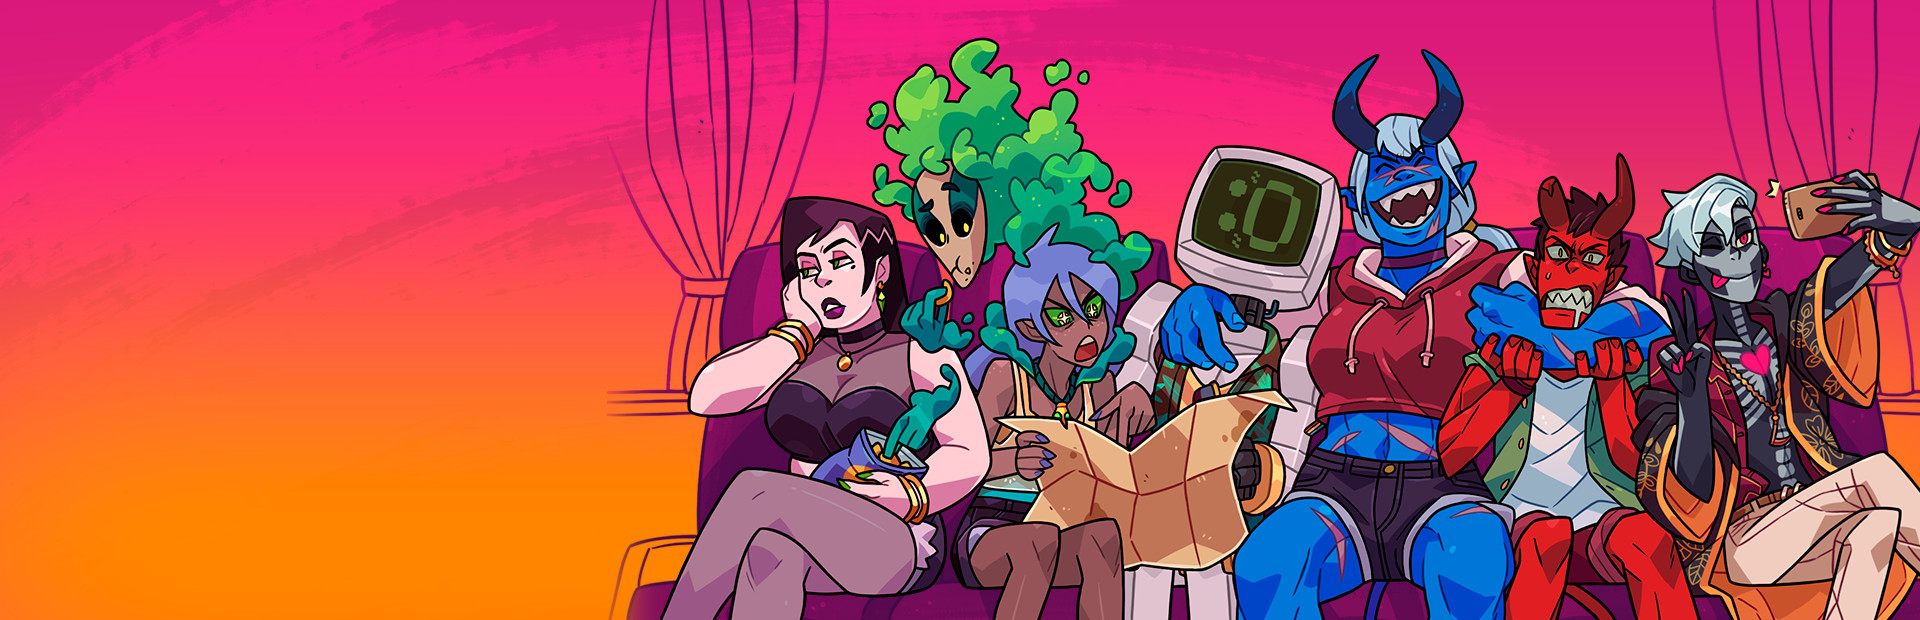 Monster Prom 2: Monster Camp cover image